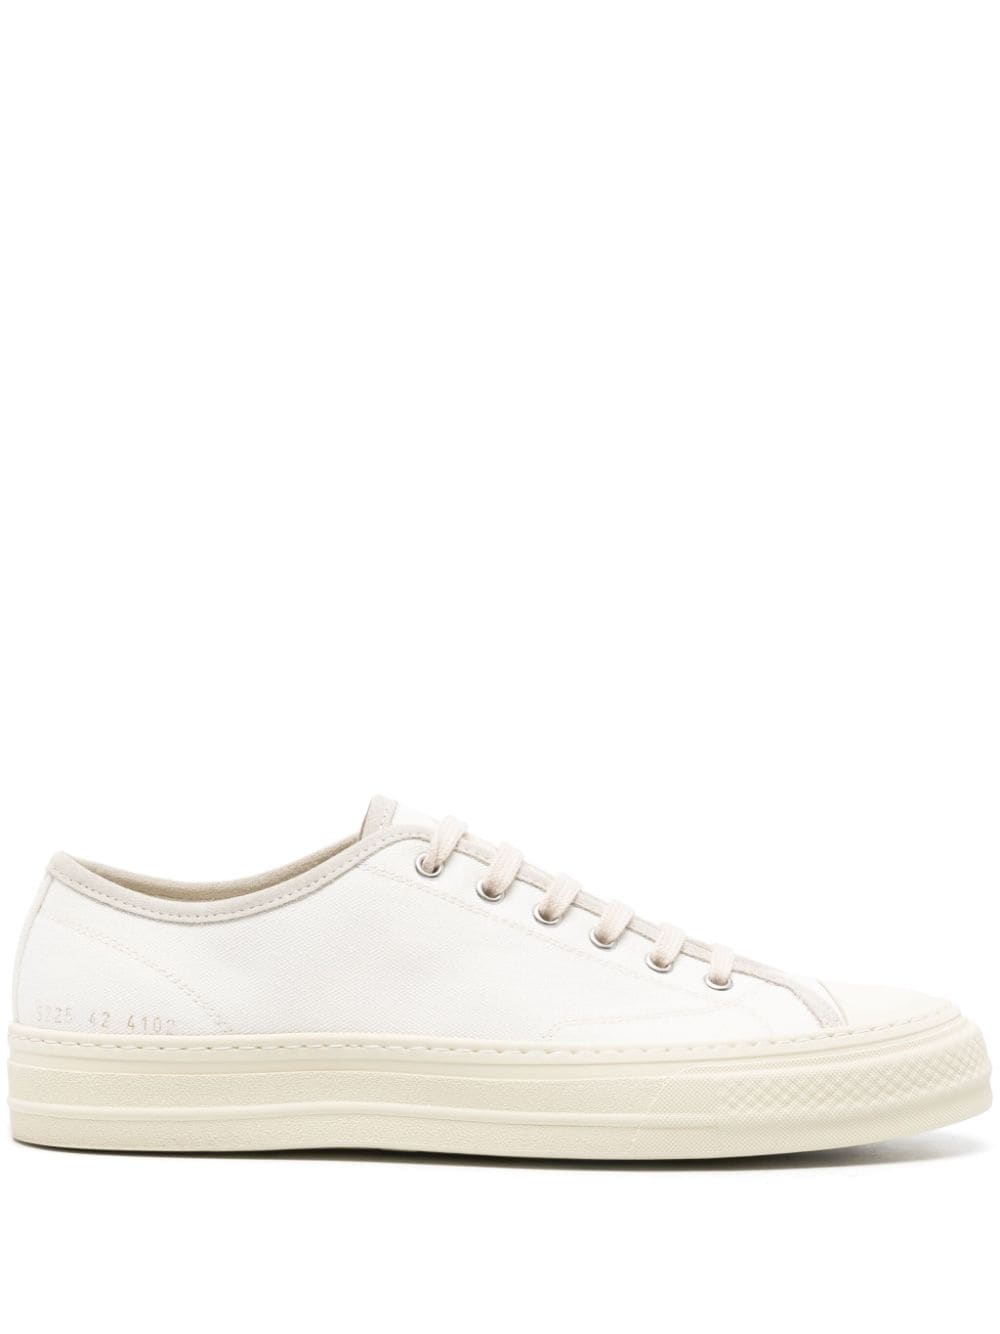 Common Projects Tournament canvas sneakers - White von Common Projects